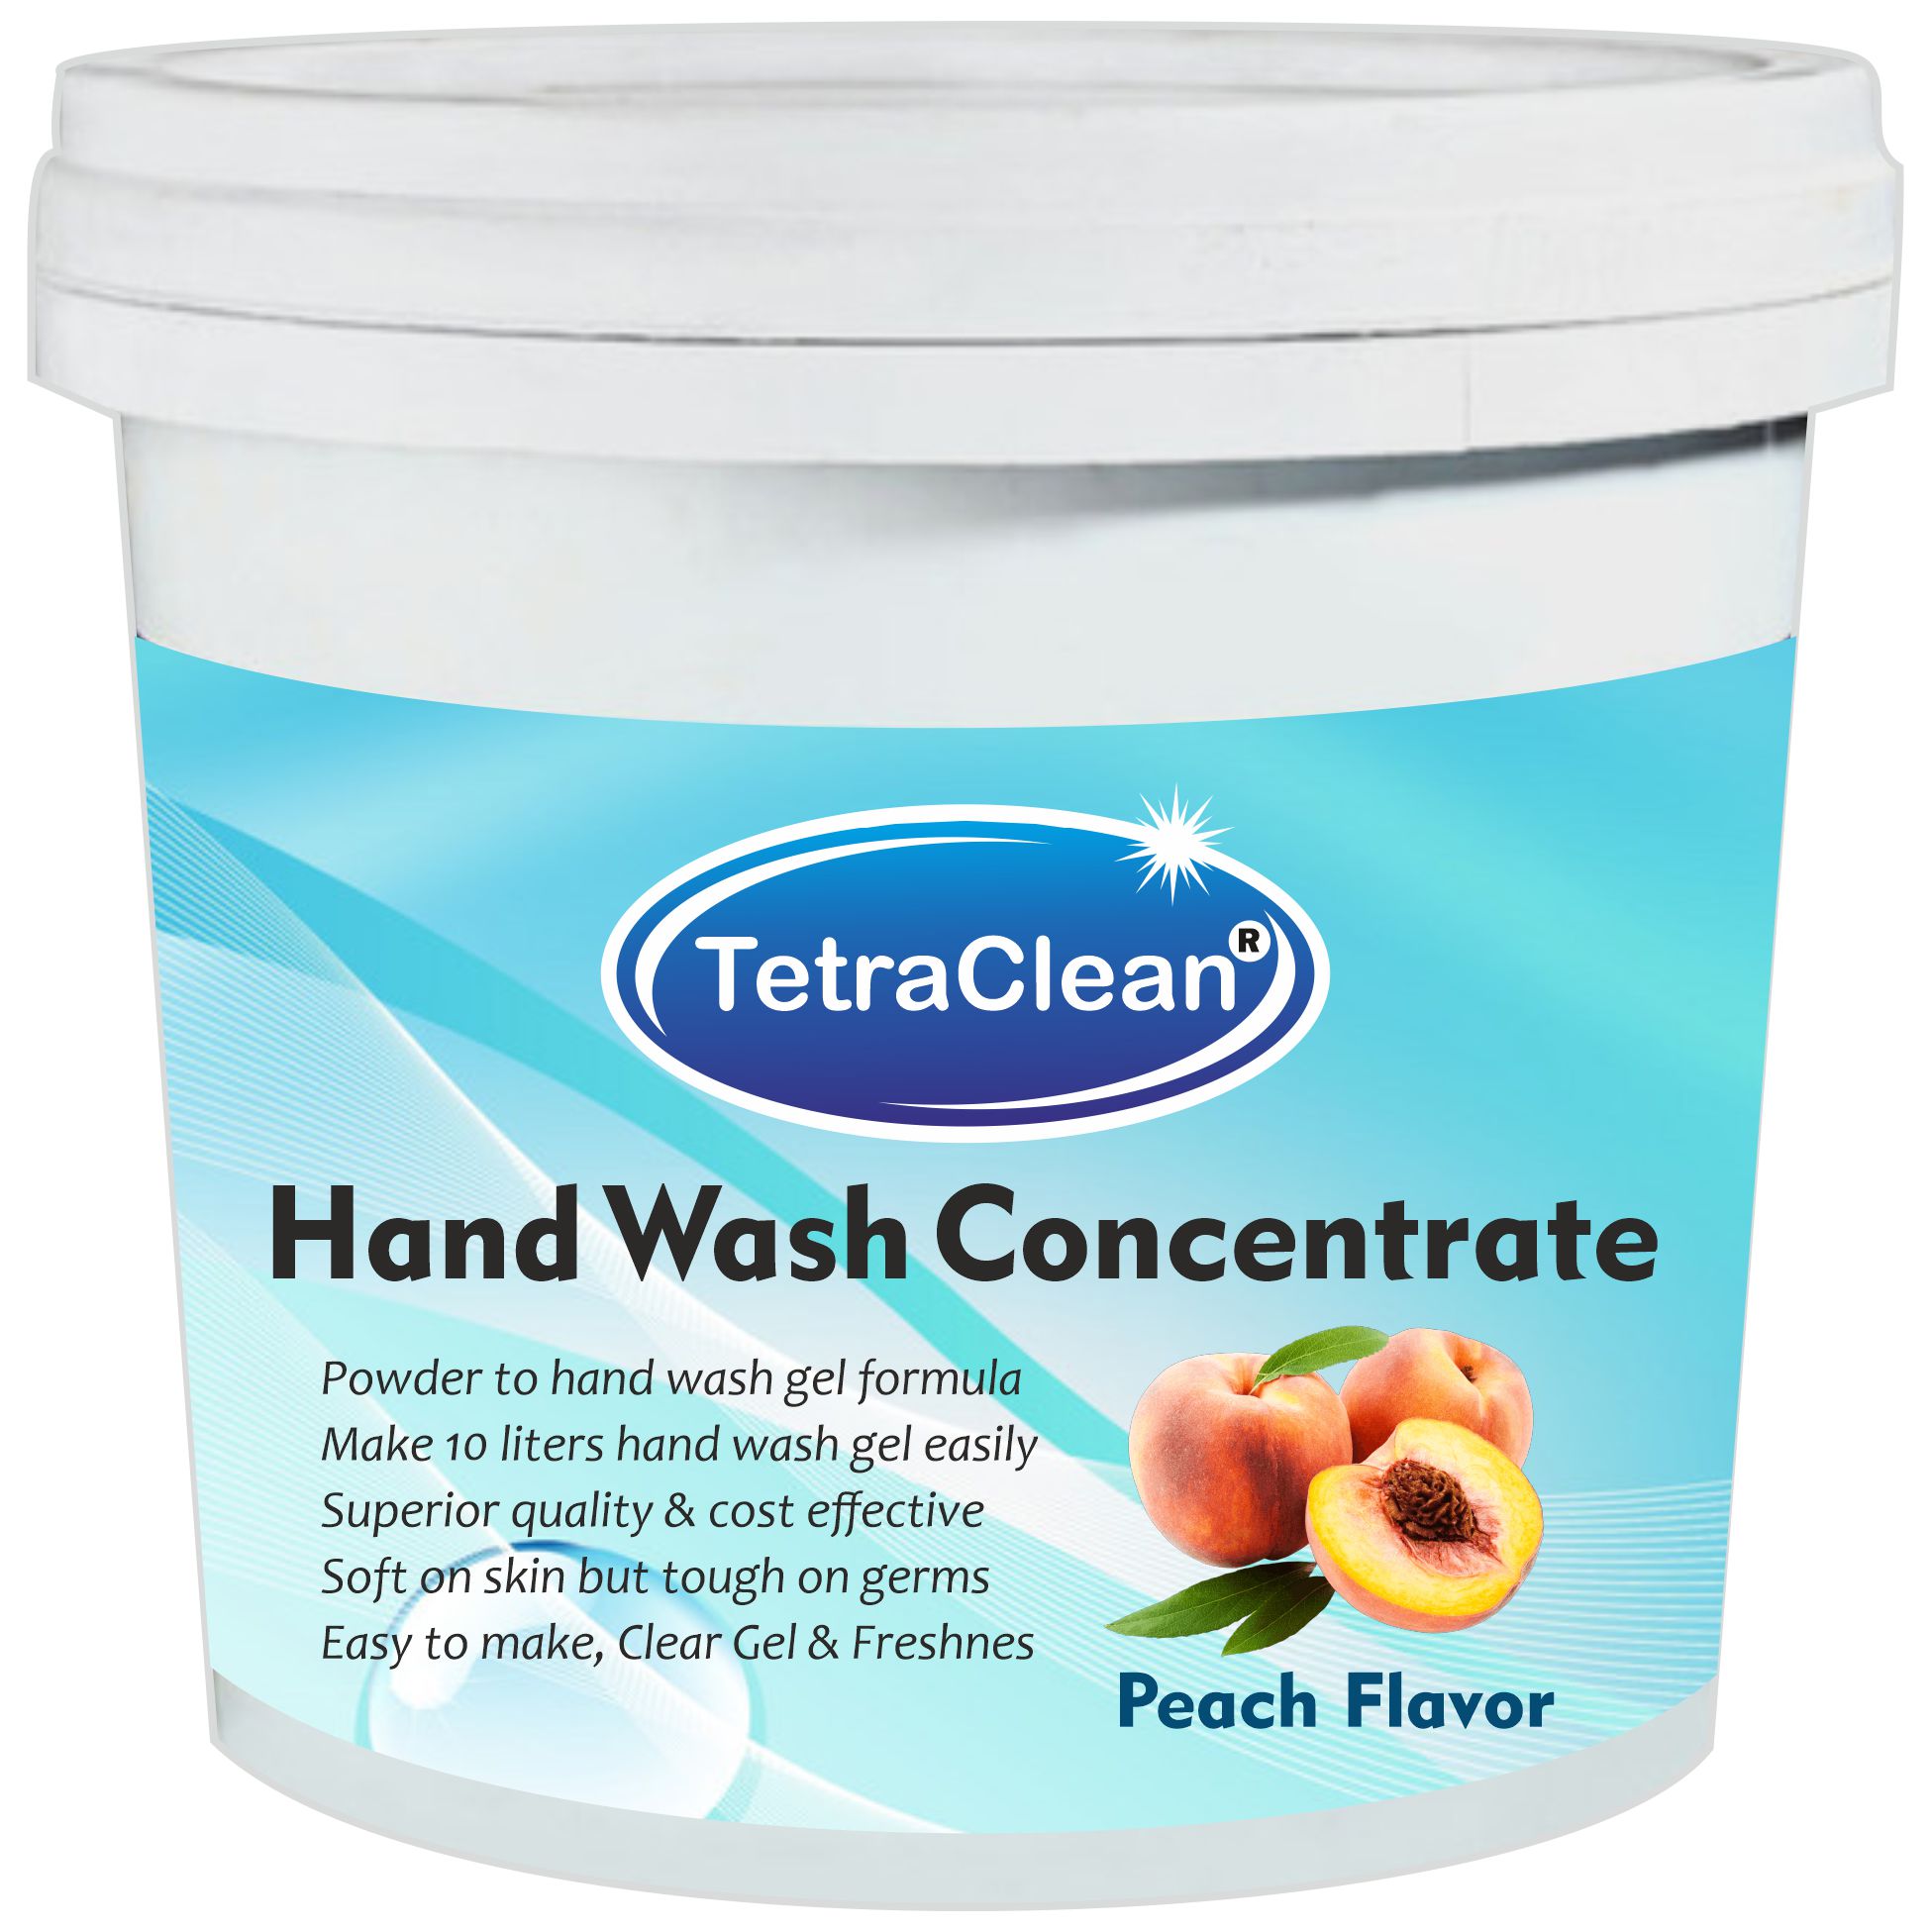 TetraClean Hand Wash Concentrate Powder - 500gm packing - with peach fragrance